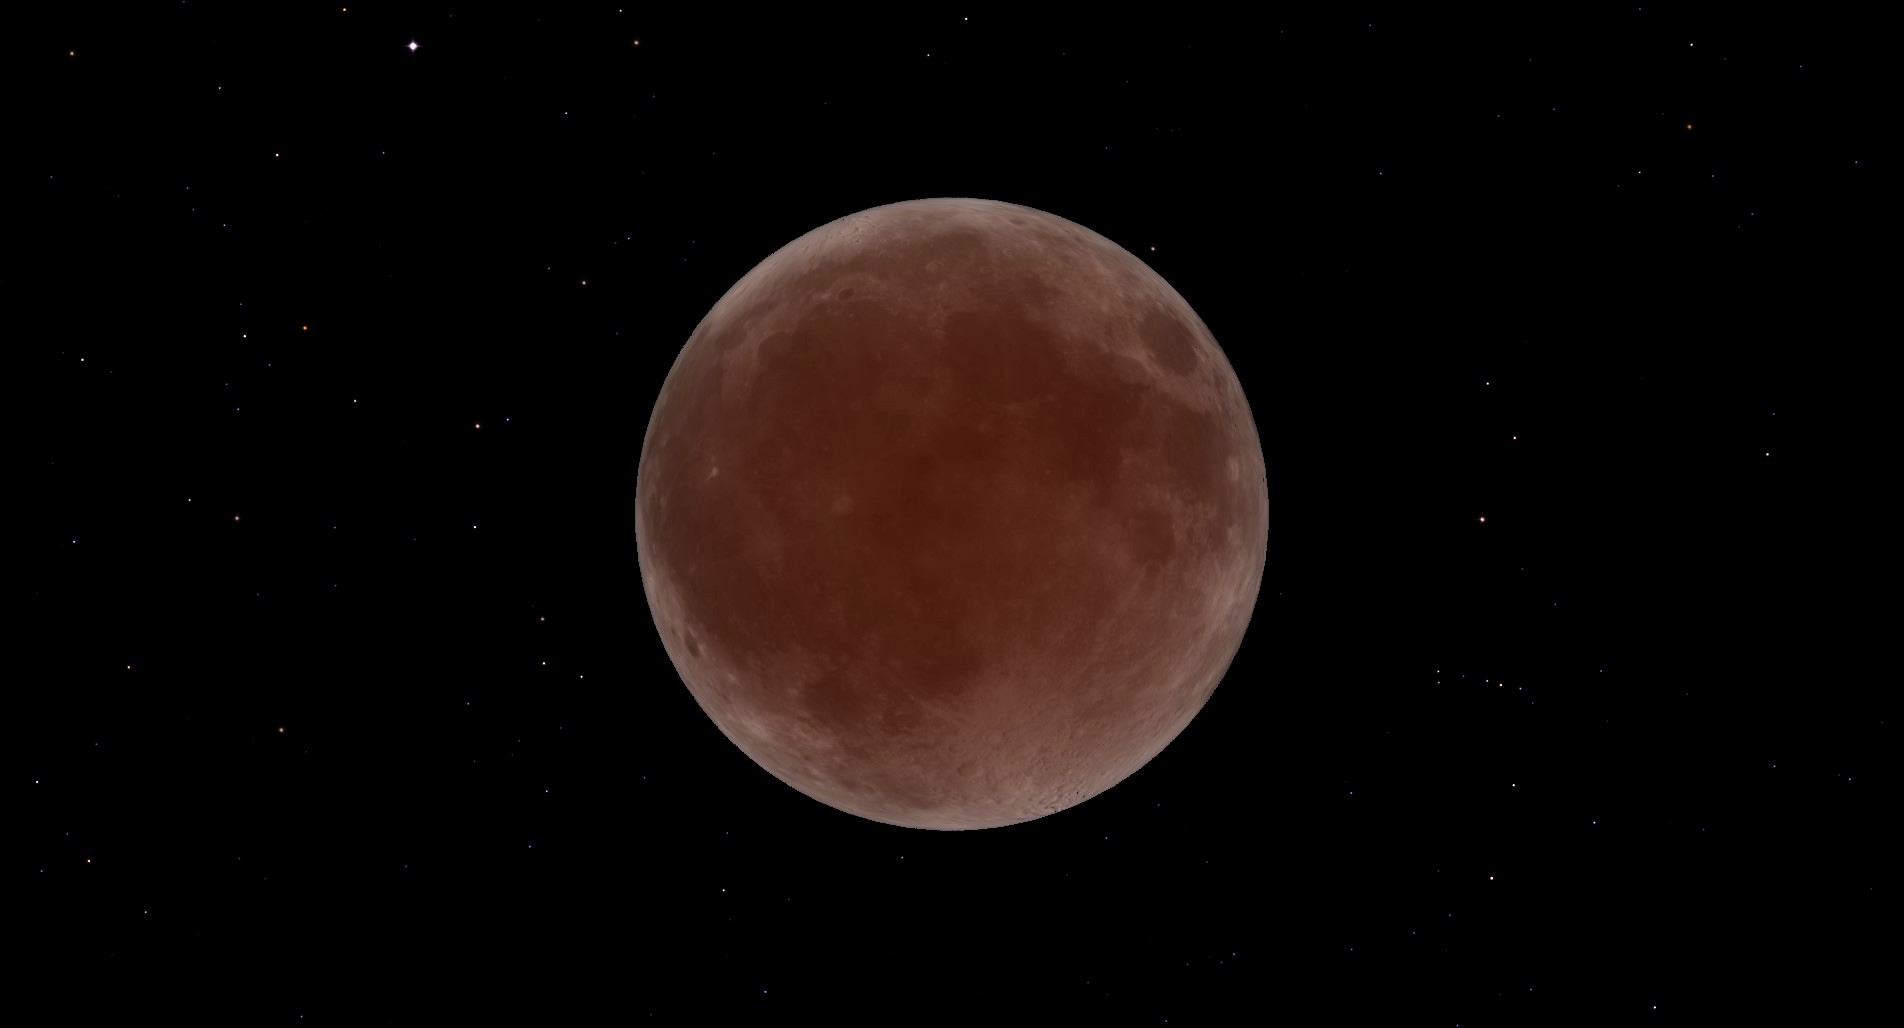 Super Flower Blood Moon lunar eclipse Is it the 1st of 4 supermoons?